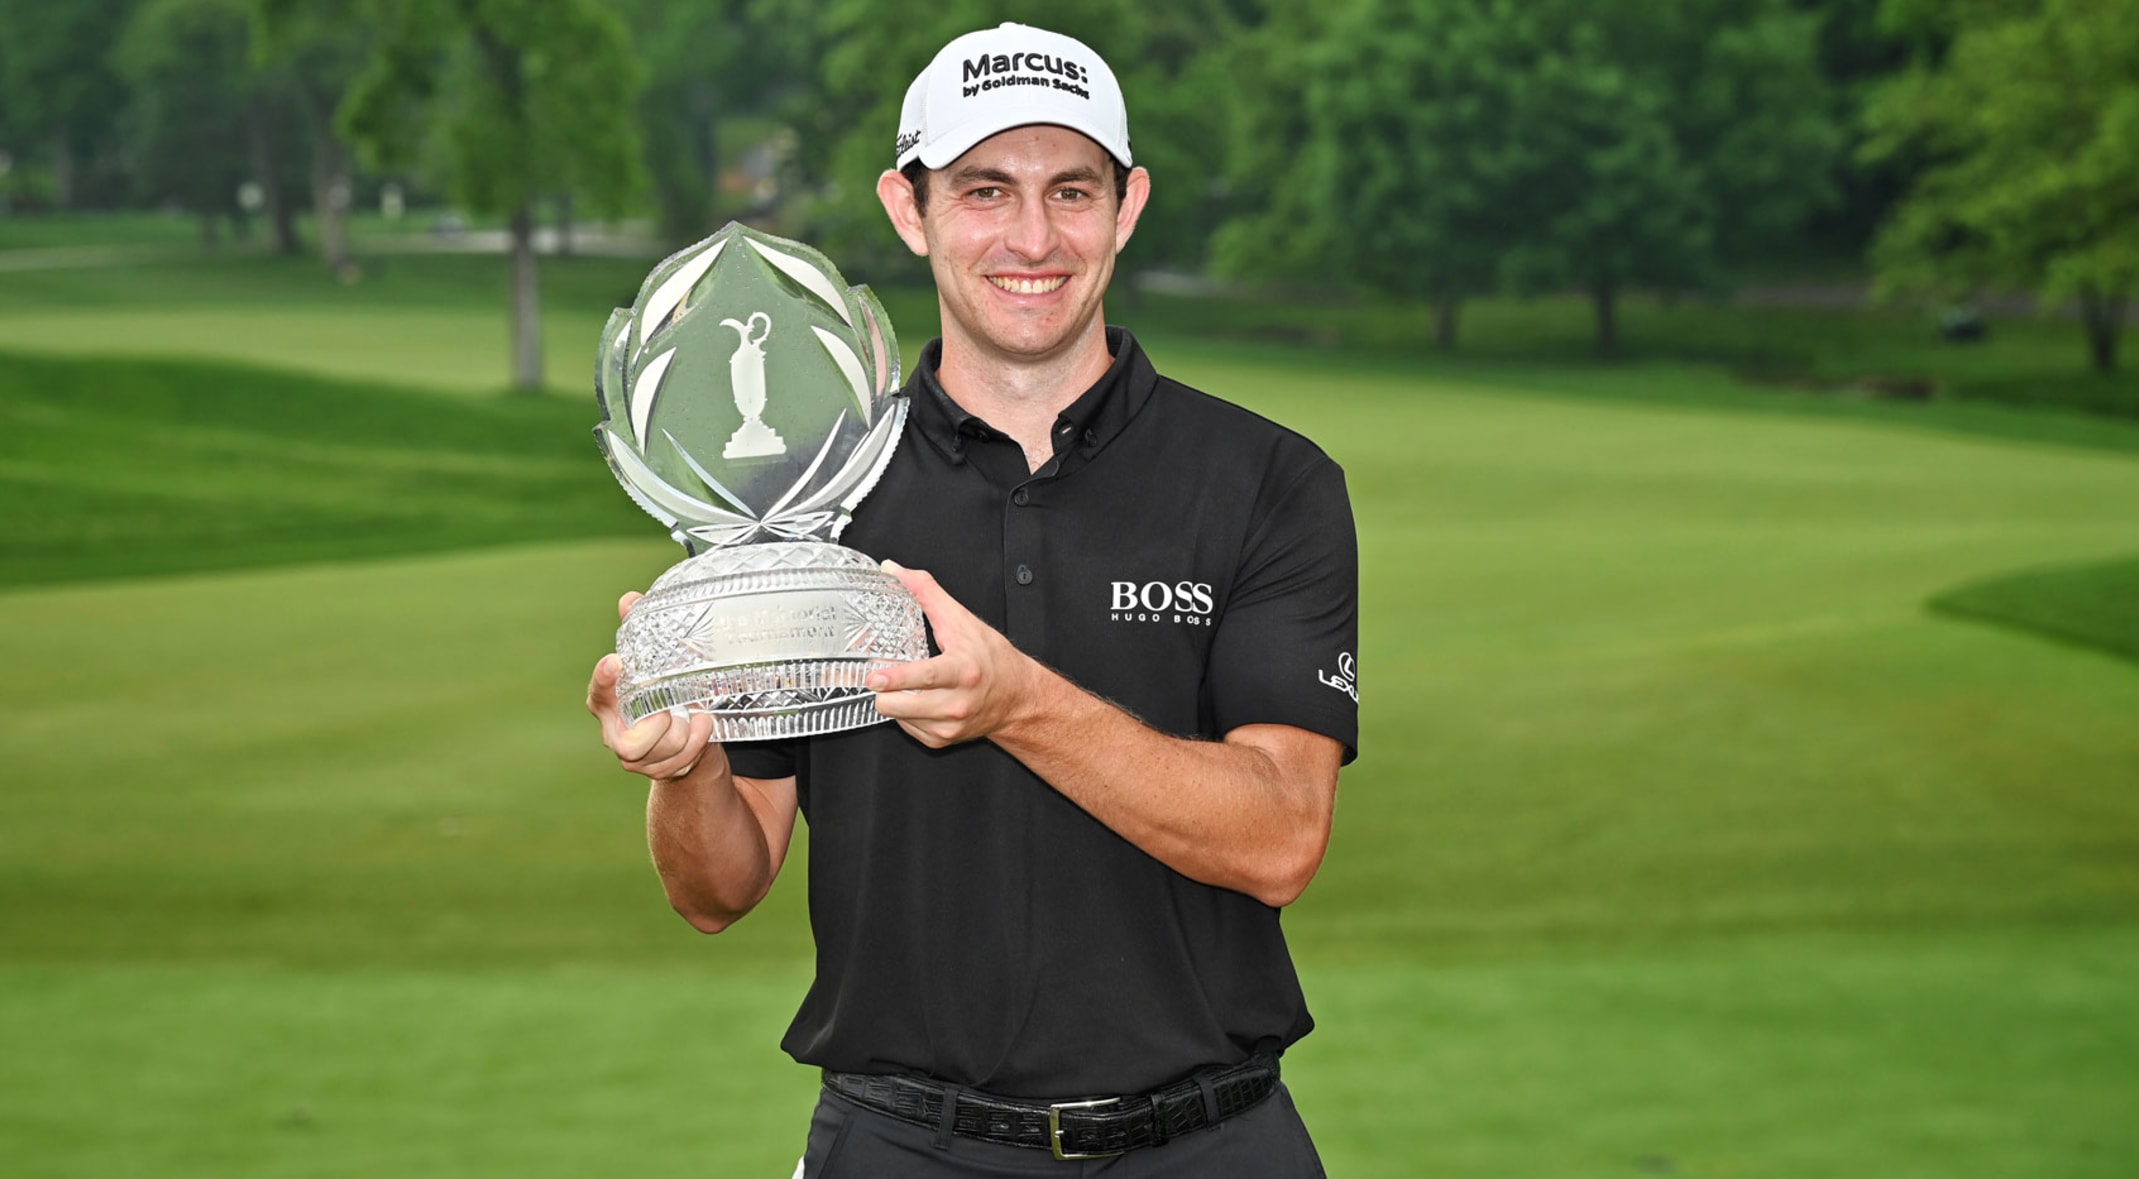 Patrick Cantlay wins second Memorial Tournament title and takes FedExCup  lead